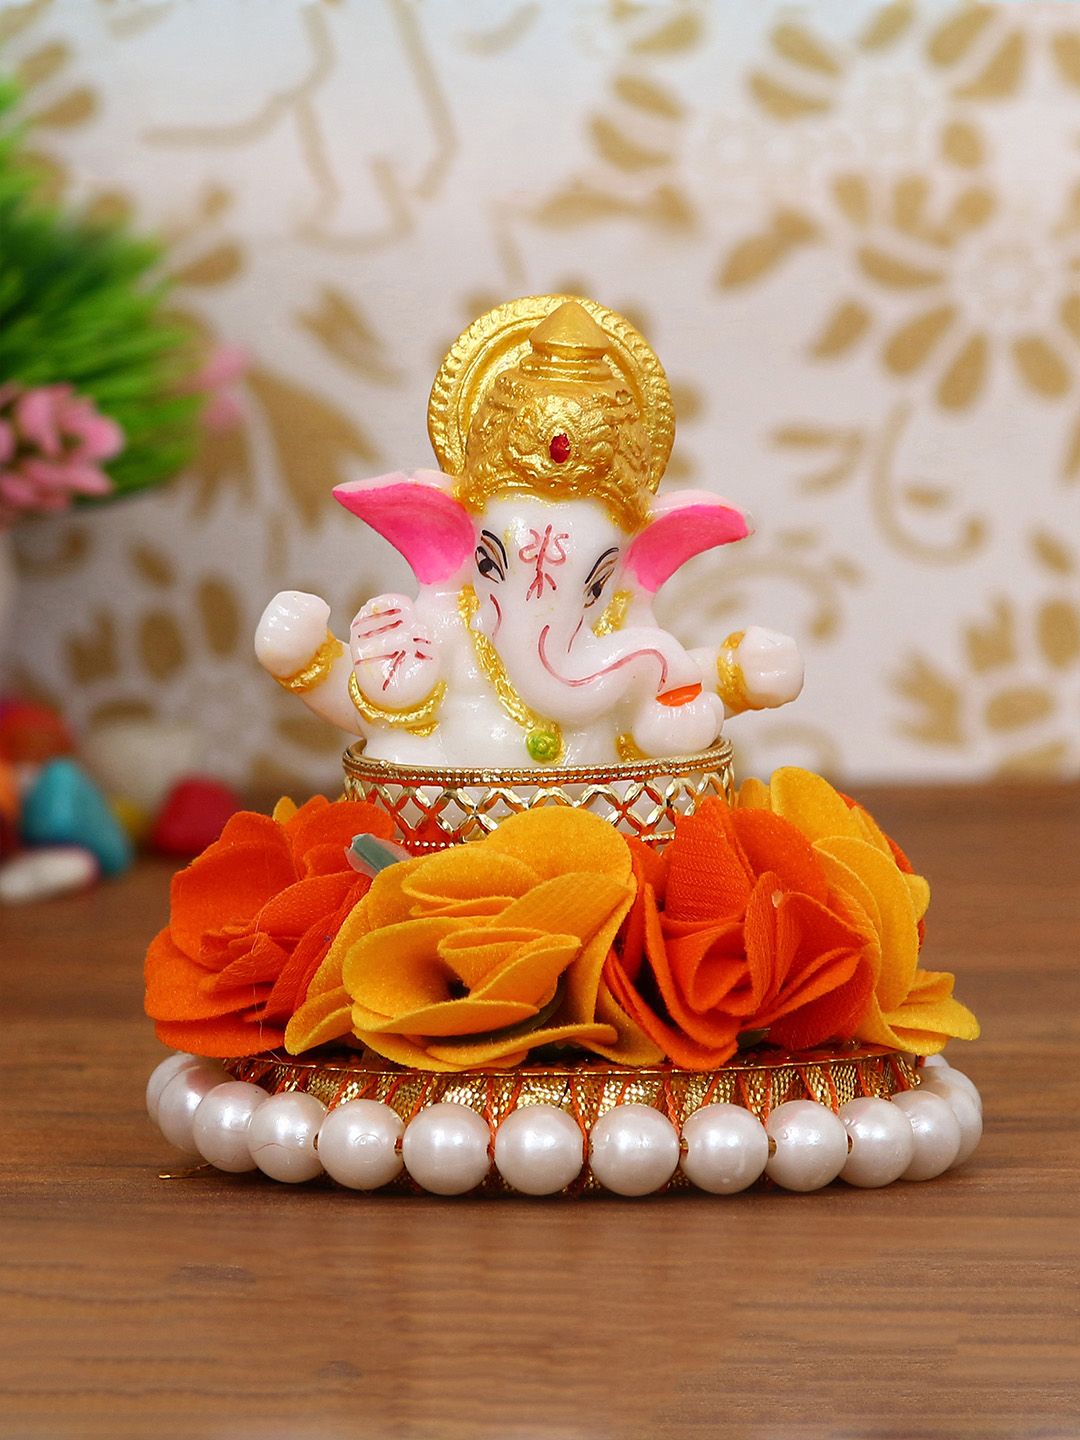 eCraftIndia Orange-Colored & White Lord Ganesha Idol On Decorative Handcrafted Plate With Flowers Showpiece Price in India